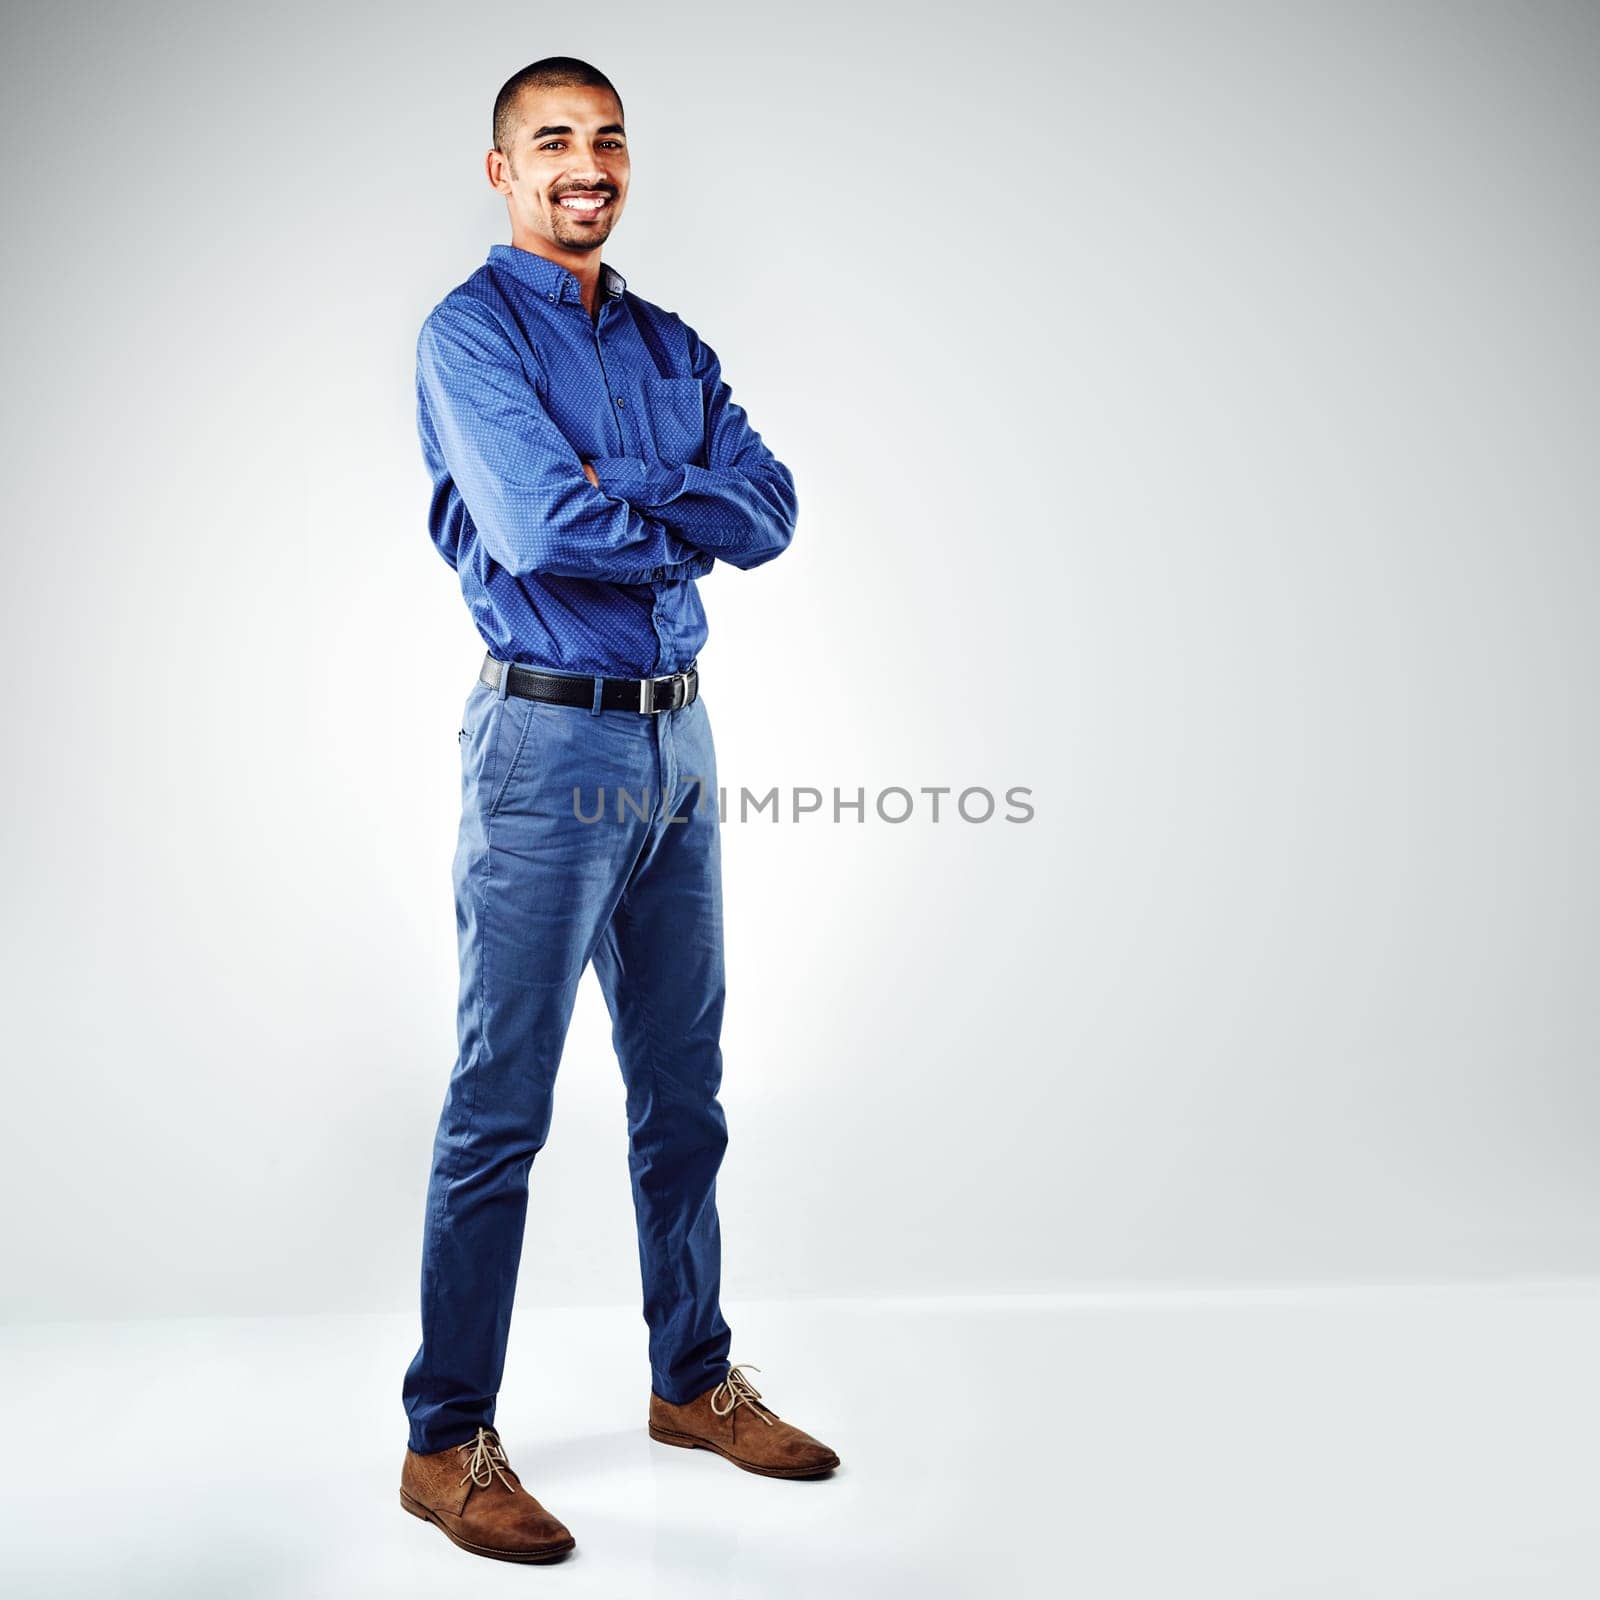 Make the leap to starting a business. a young businessman posing against a grey background